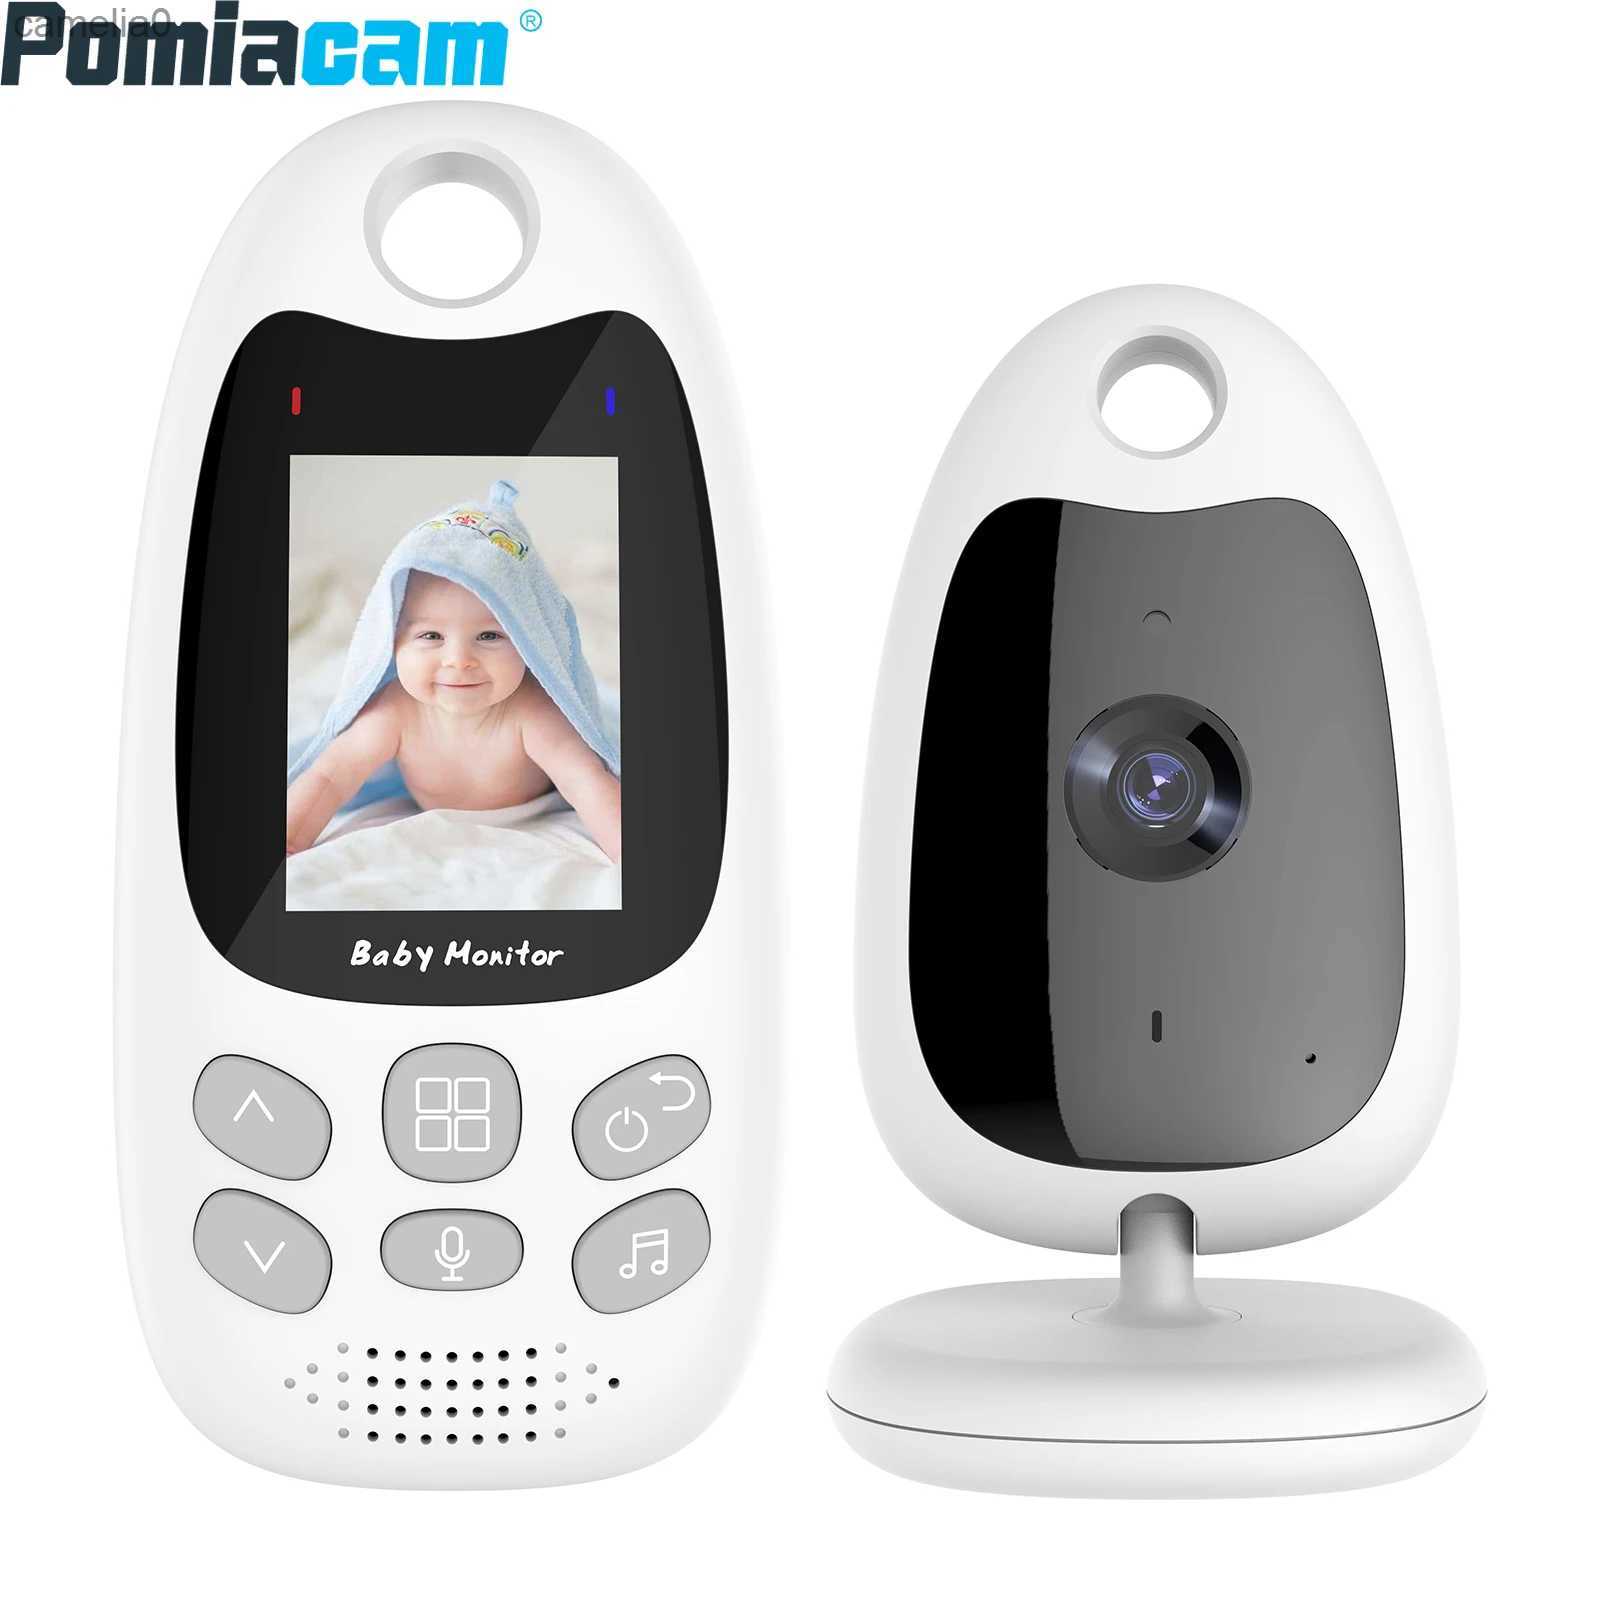 Baby Monitors Mini video baby monitor with automatic night vision two-way audio call cry alarm energy-saving lullaby baby room camera equipment VB610C240412